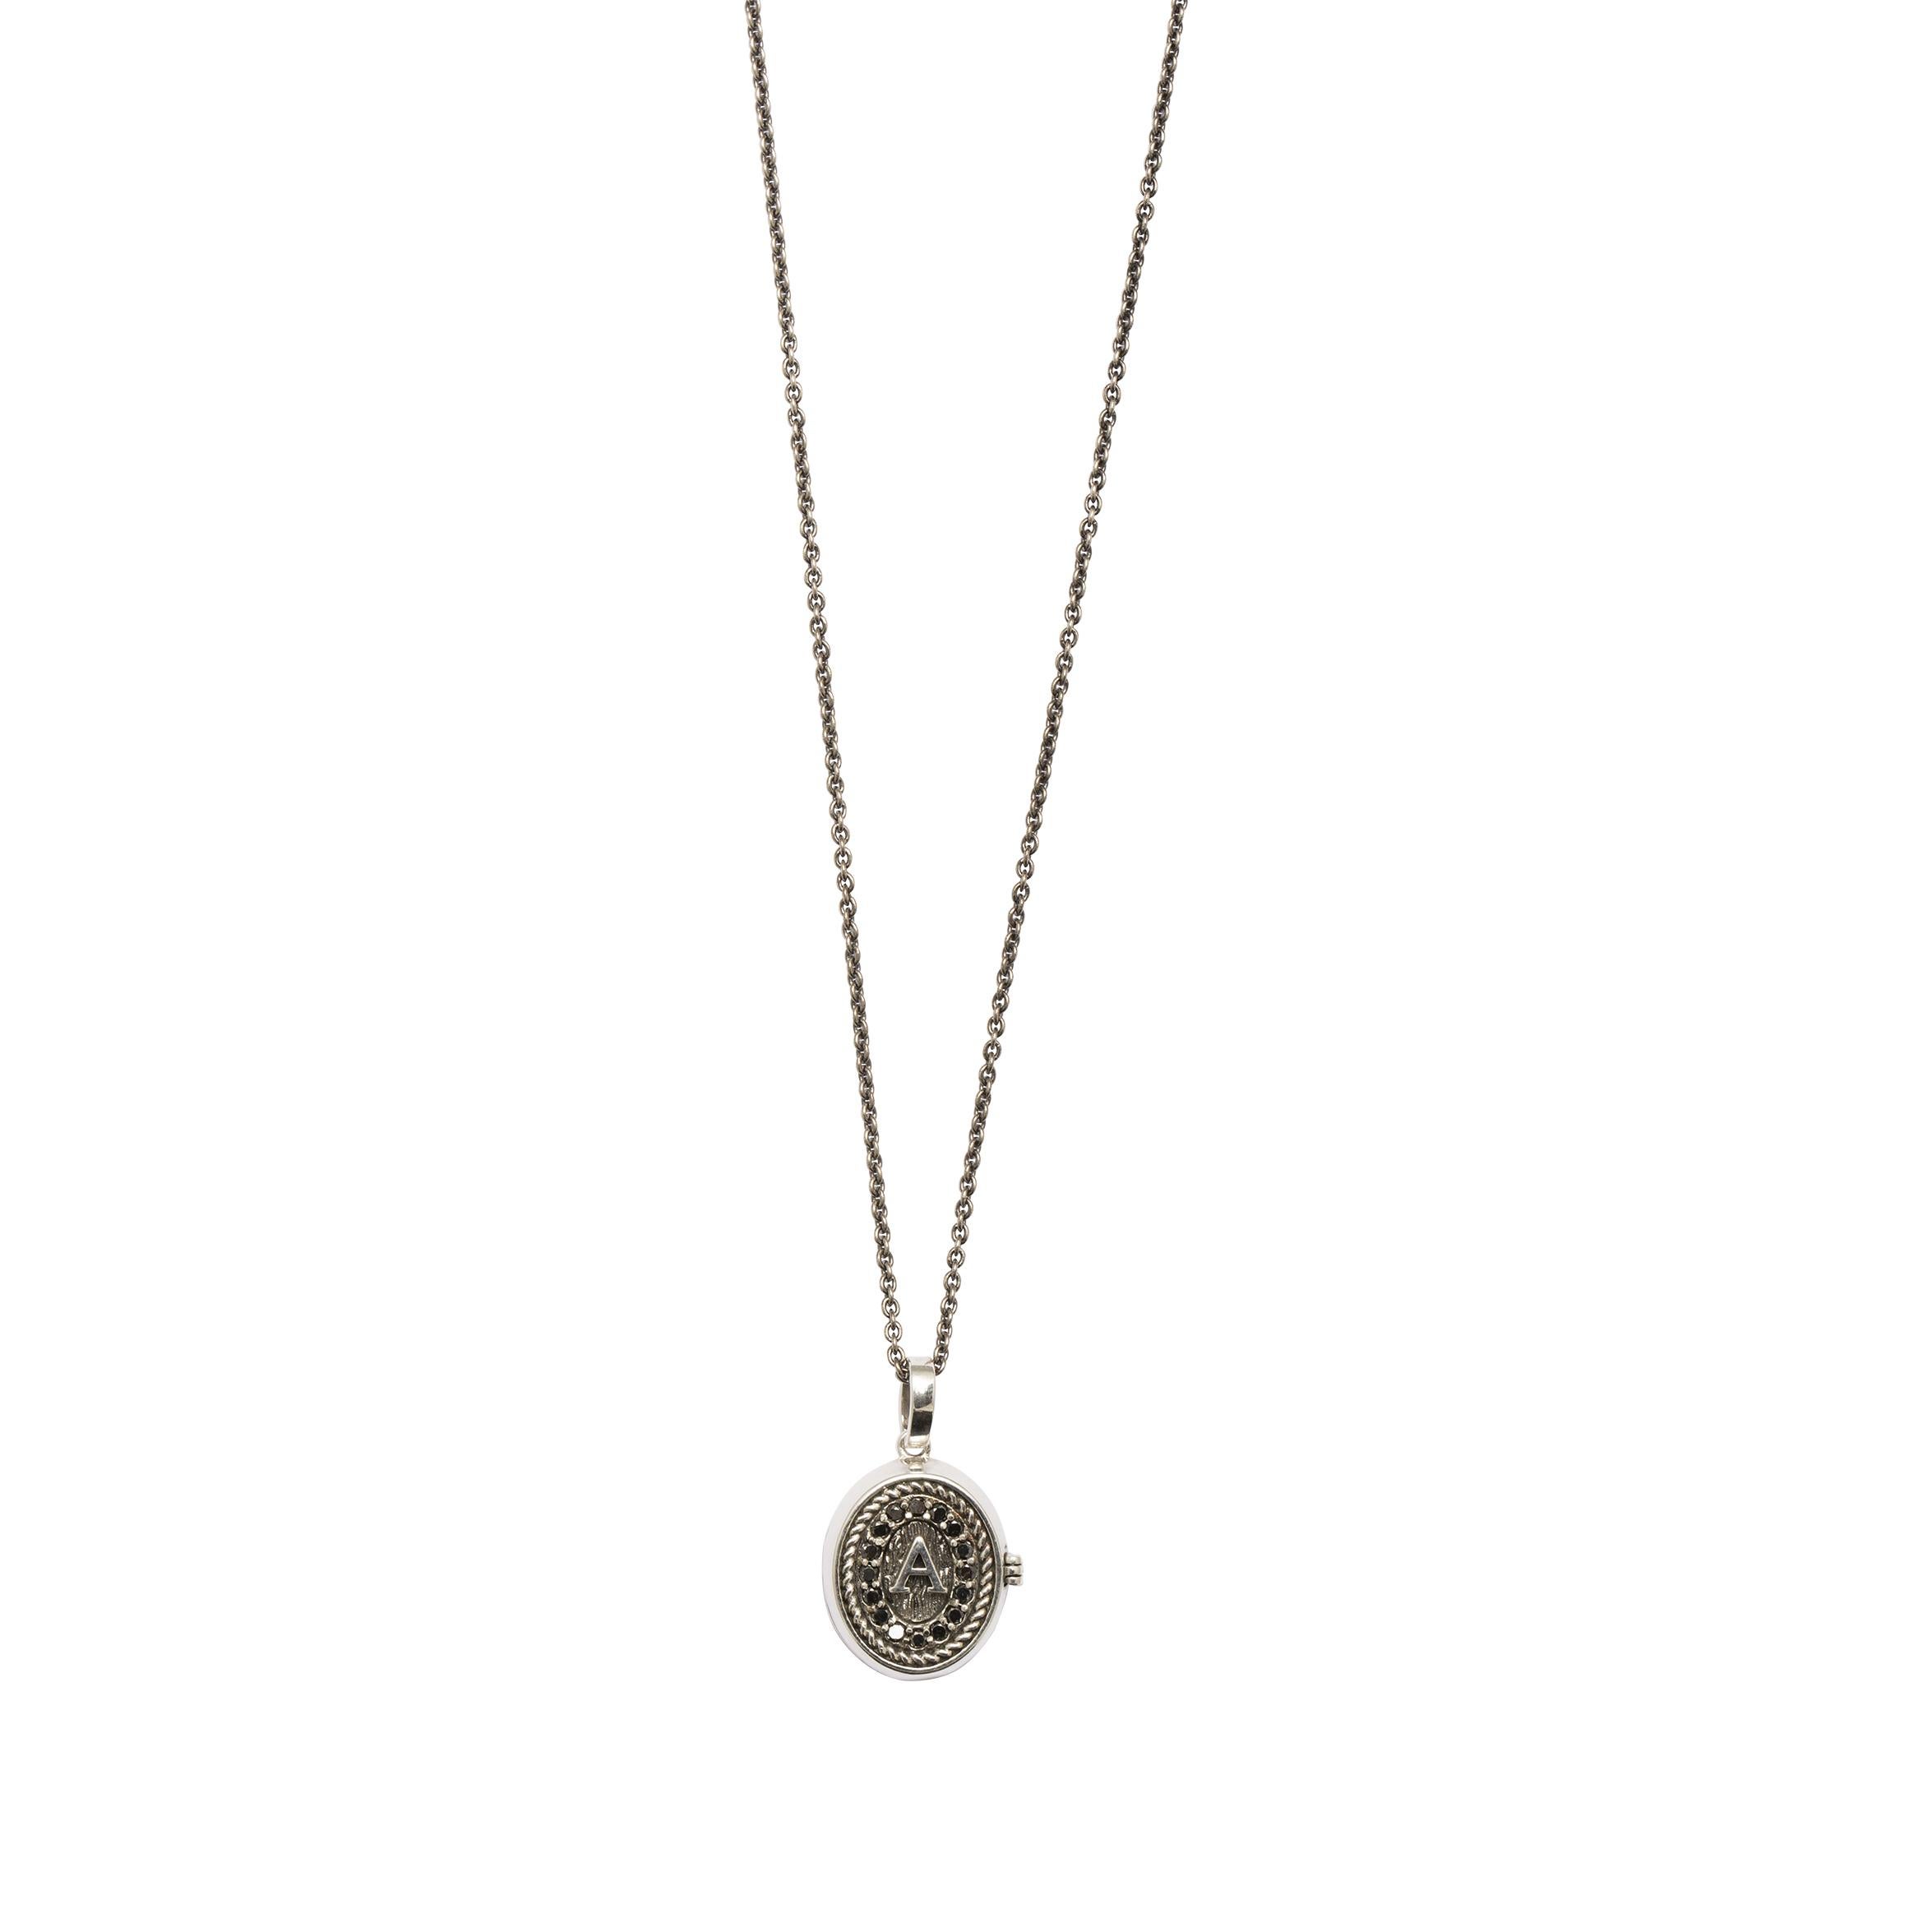 Round Cut Initials Locket Pendant Signet in Silver and Black Diamond Pavè from IOSSELLIANI For Sale